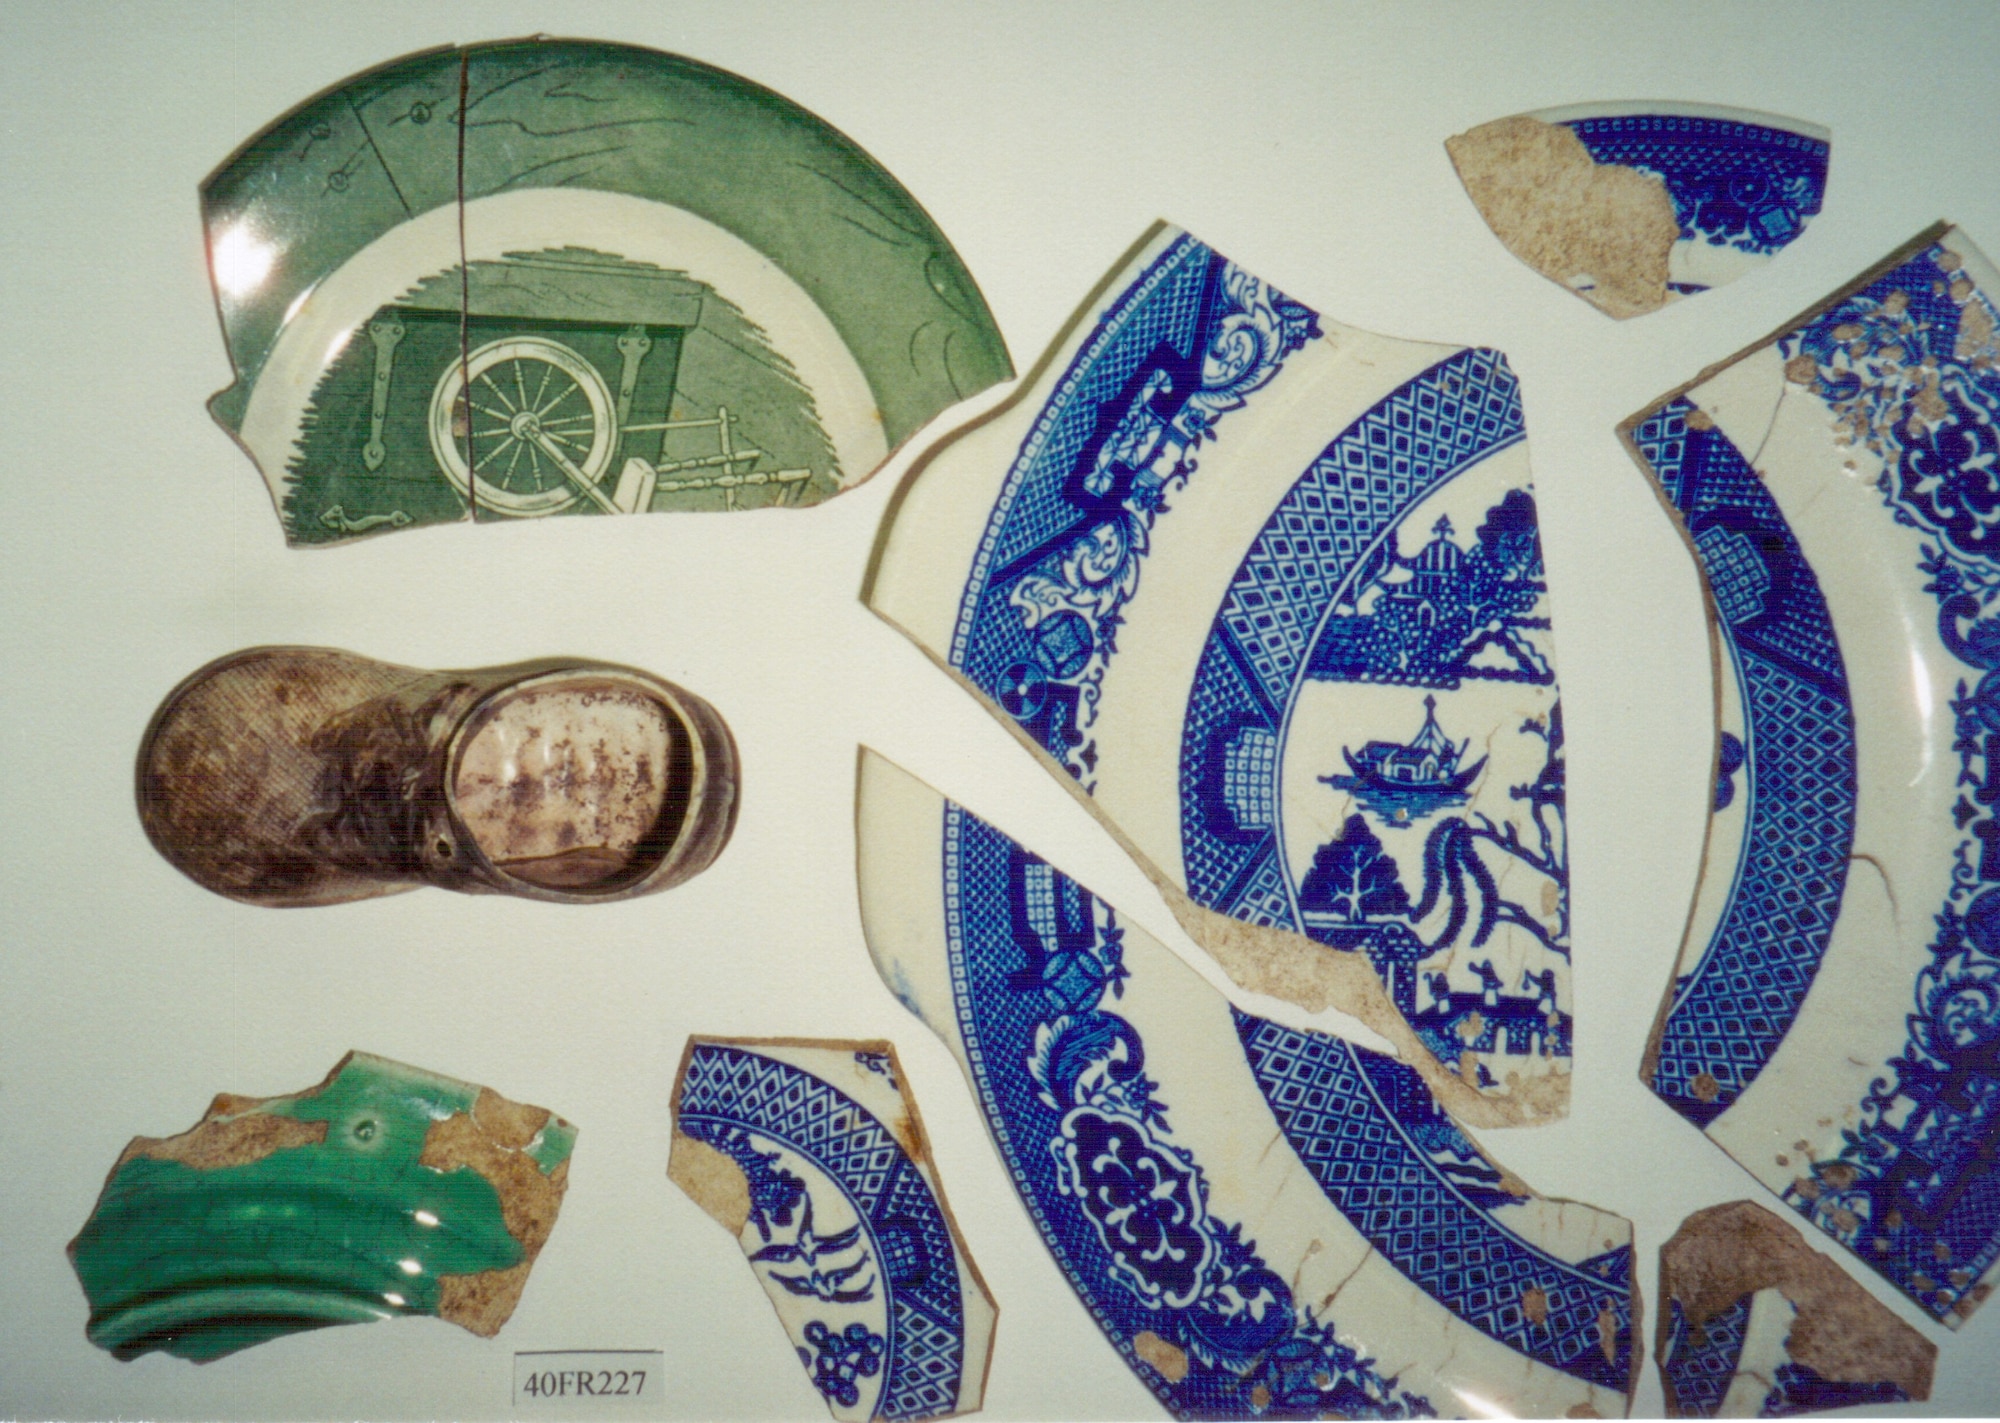 Ceramic artifacts discovered in 1997 from an archaeological site of an old farmstead at Arnold Air Force Base, Tenn., are seen here in a photo taken in 2004. (U.S. Air Force photo by Shawn Chapman)